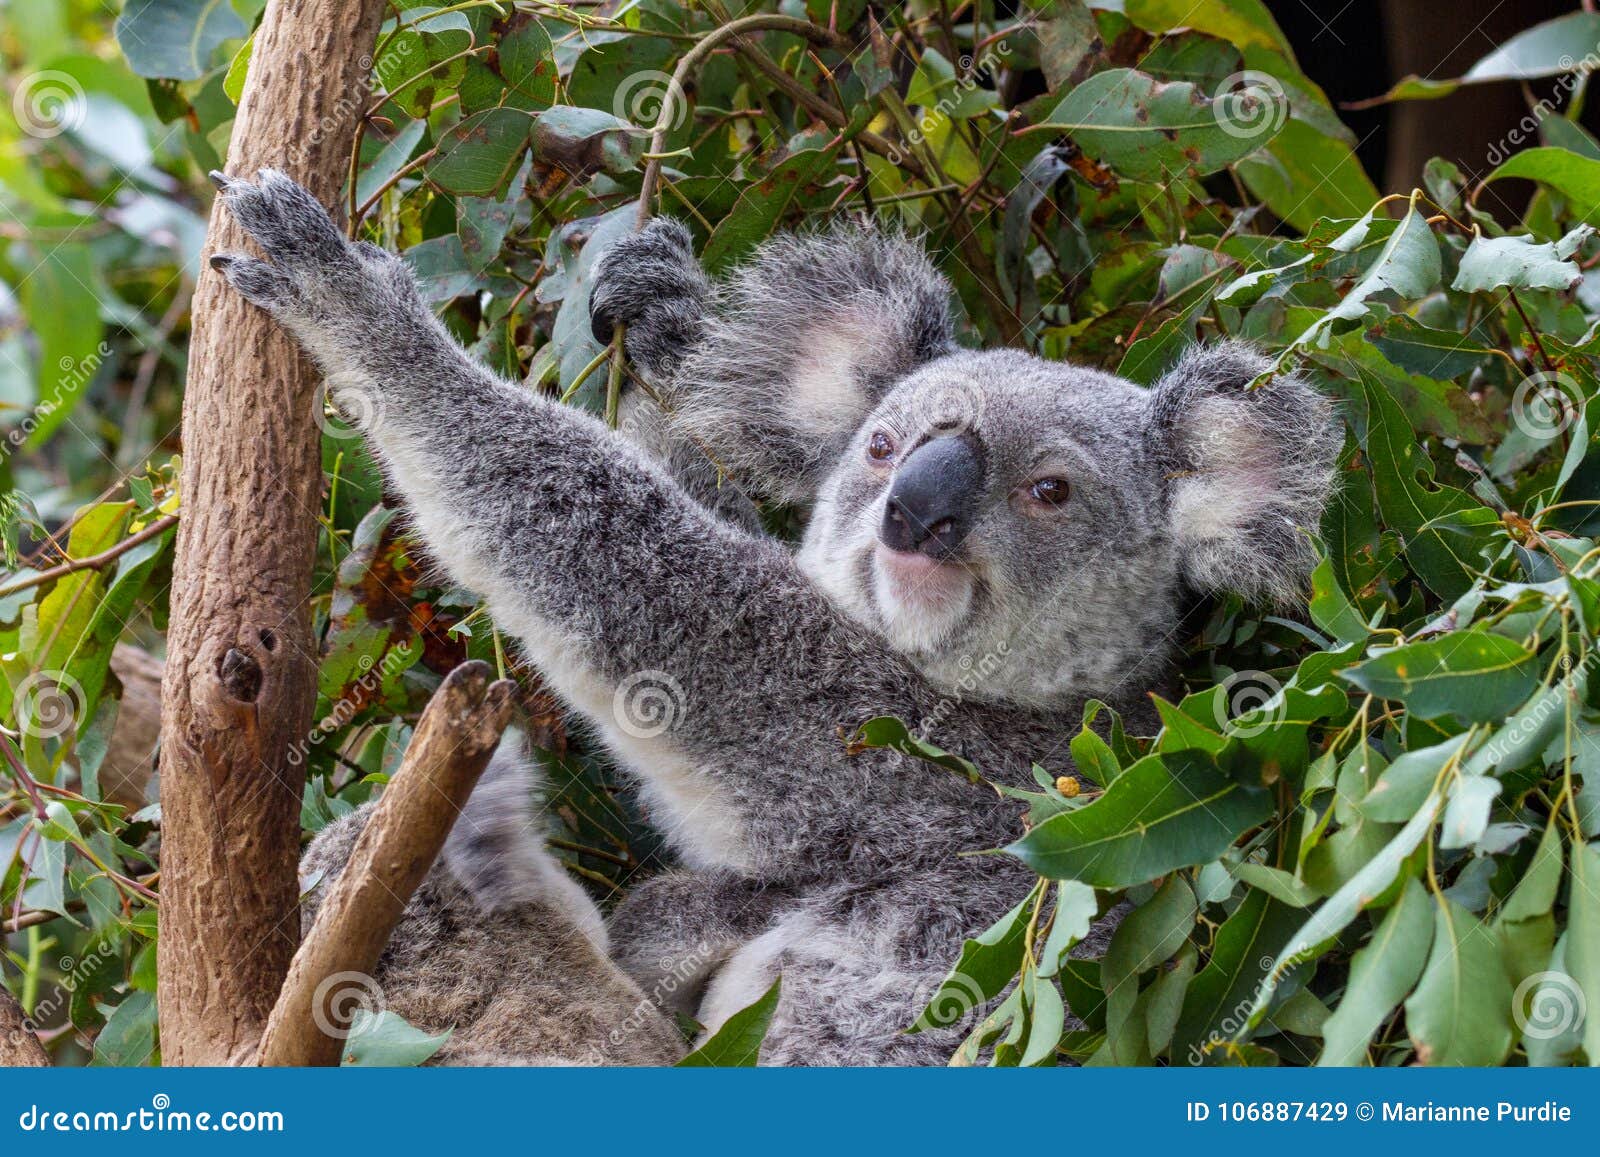 A Mother Koala With A Joey At Her Feet Stock Image - Image of crouching